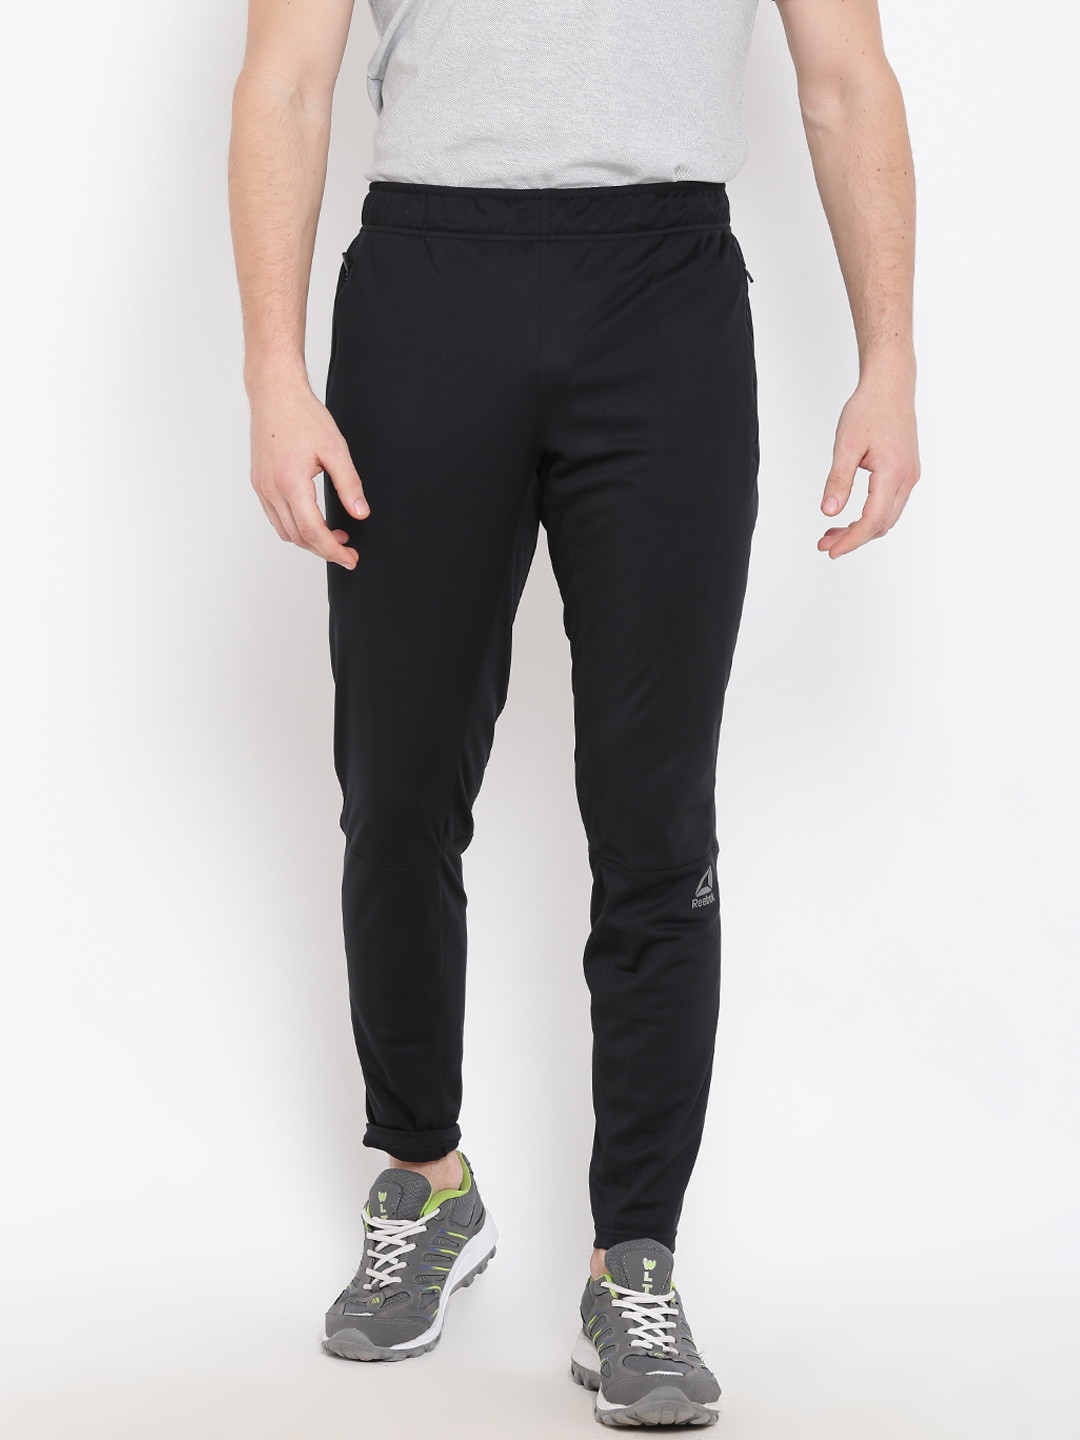 Reebok ONE Series Knit Trackster Pant